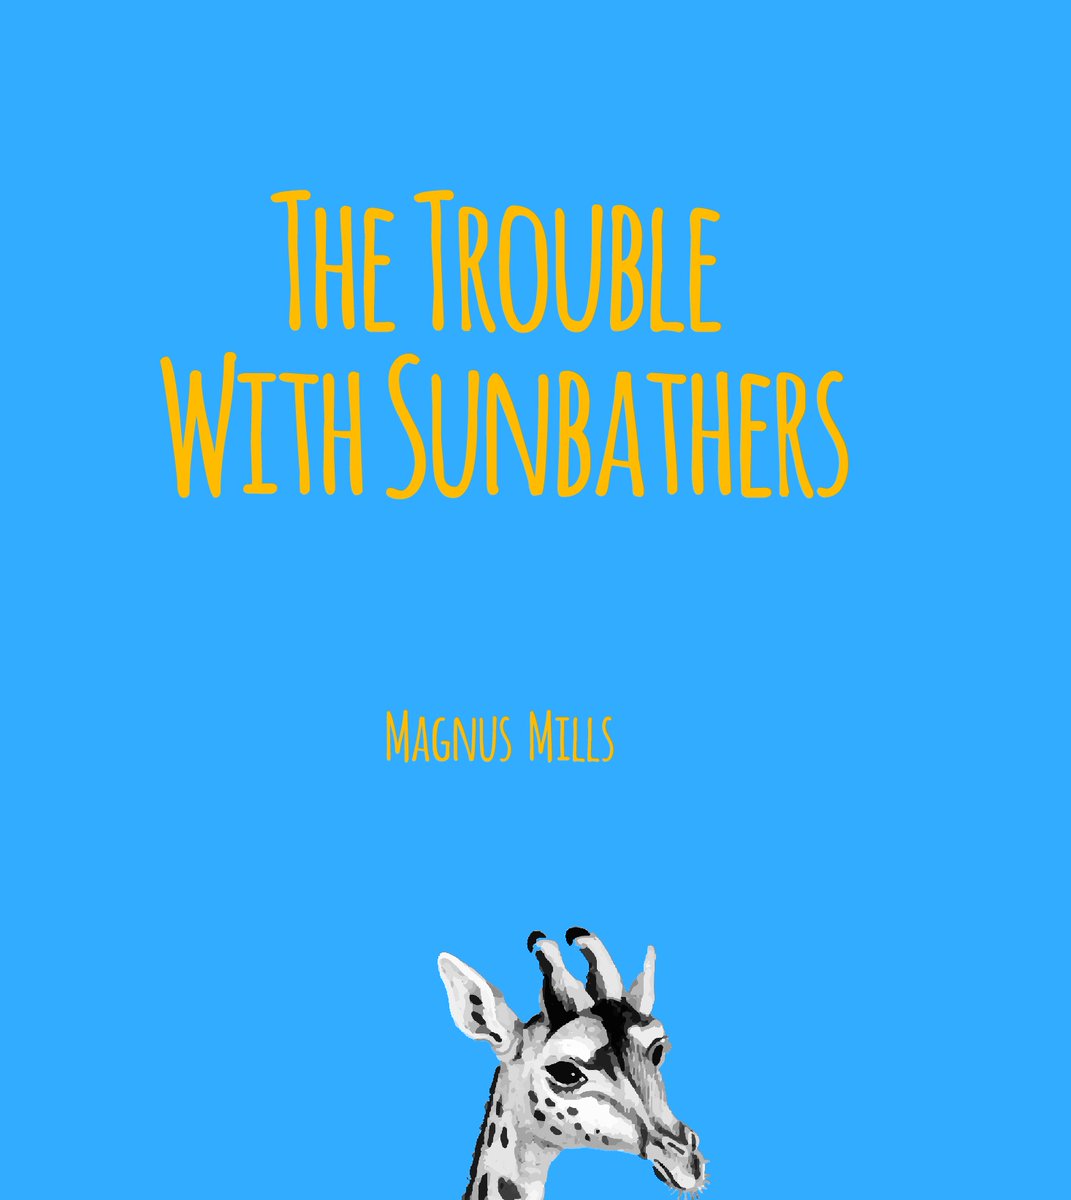 My new book The Trouble With Sunbathers is out now and available to buy from Amazon and from all good booksellers. #magnusmills #magnus_mills #writer #author #novelist #newbook #thetroublewithsunbathers #girlonanelephant